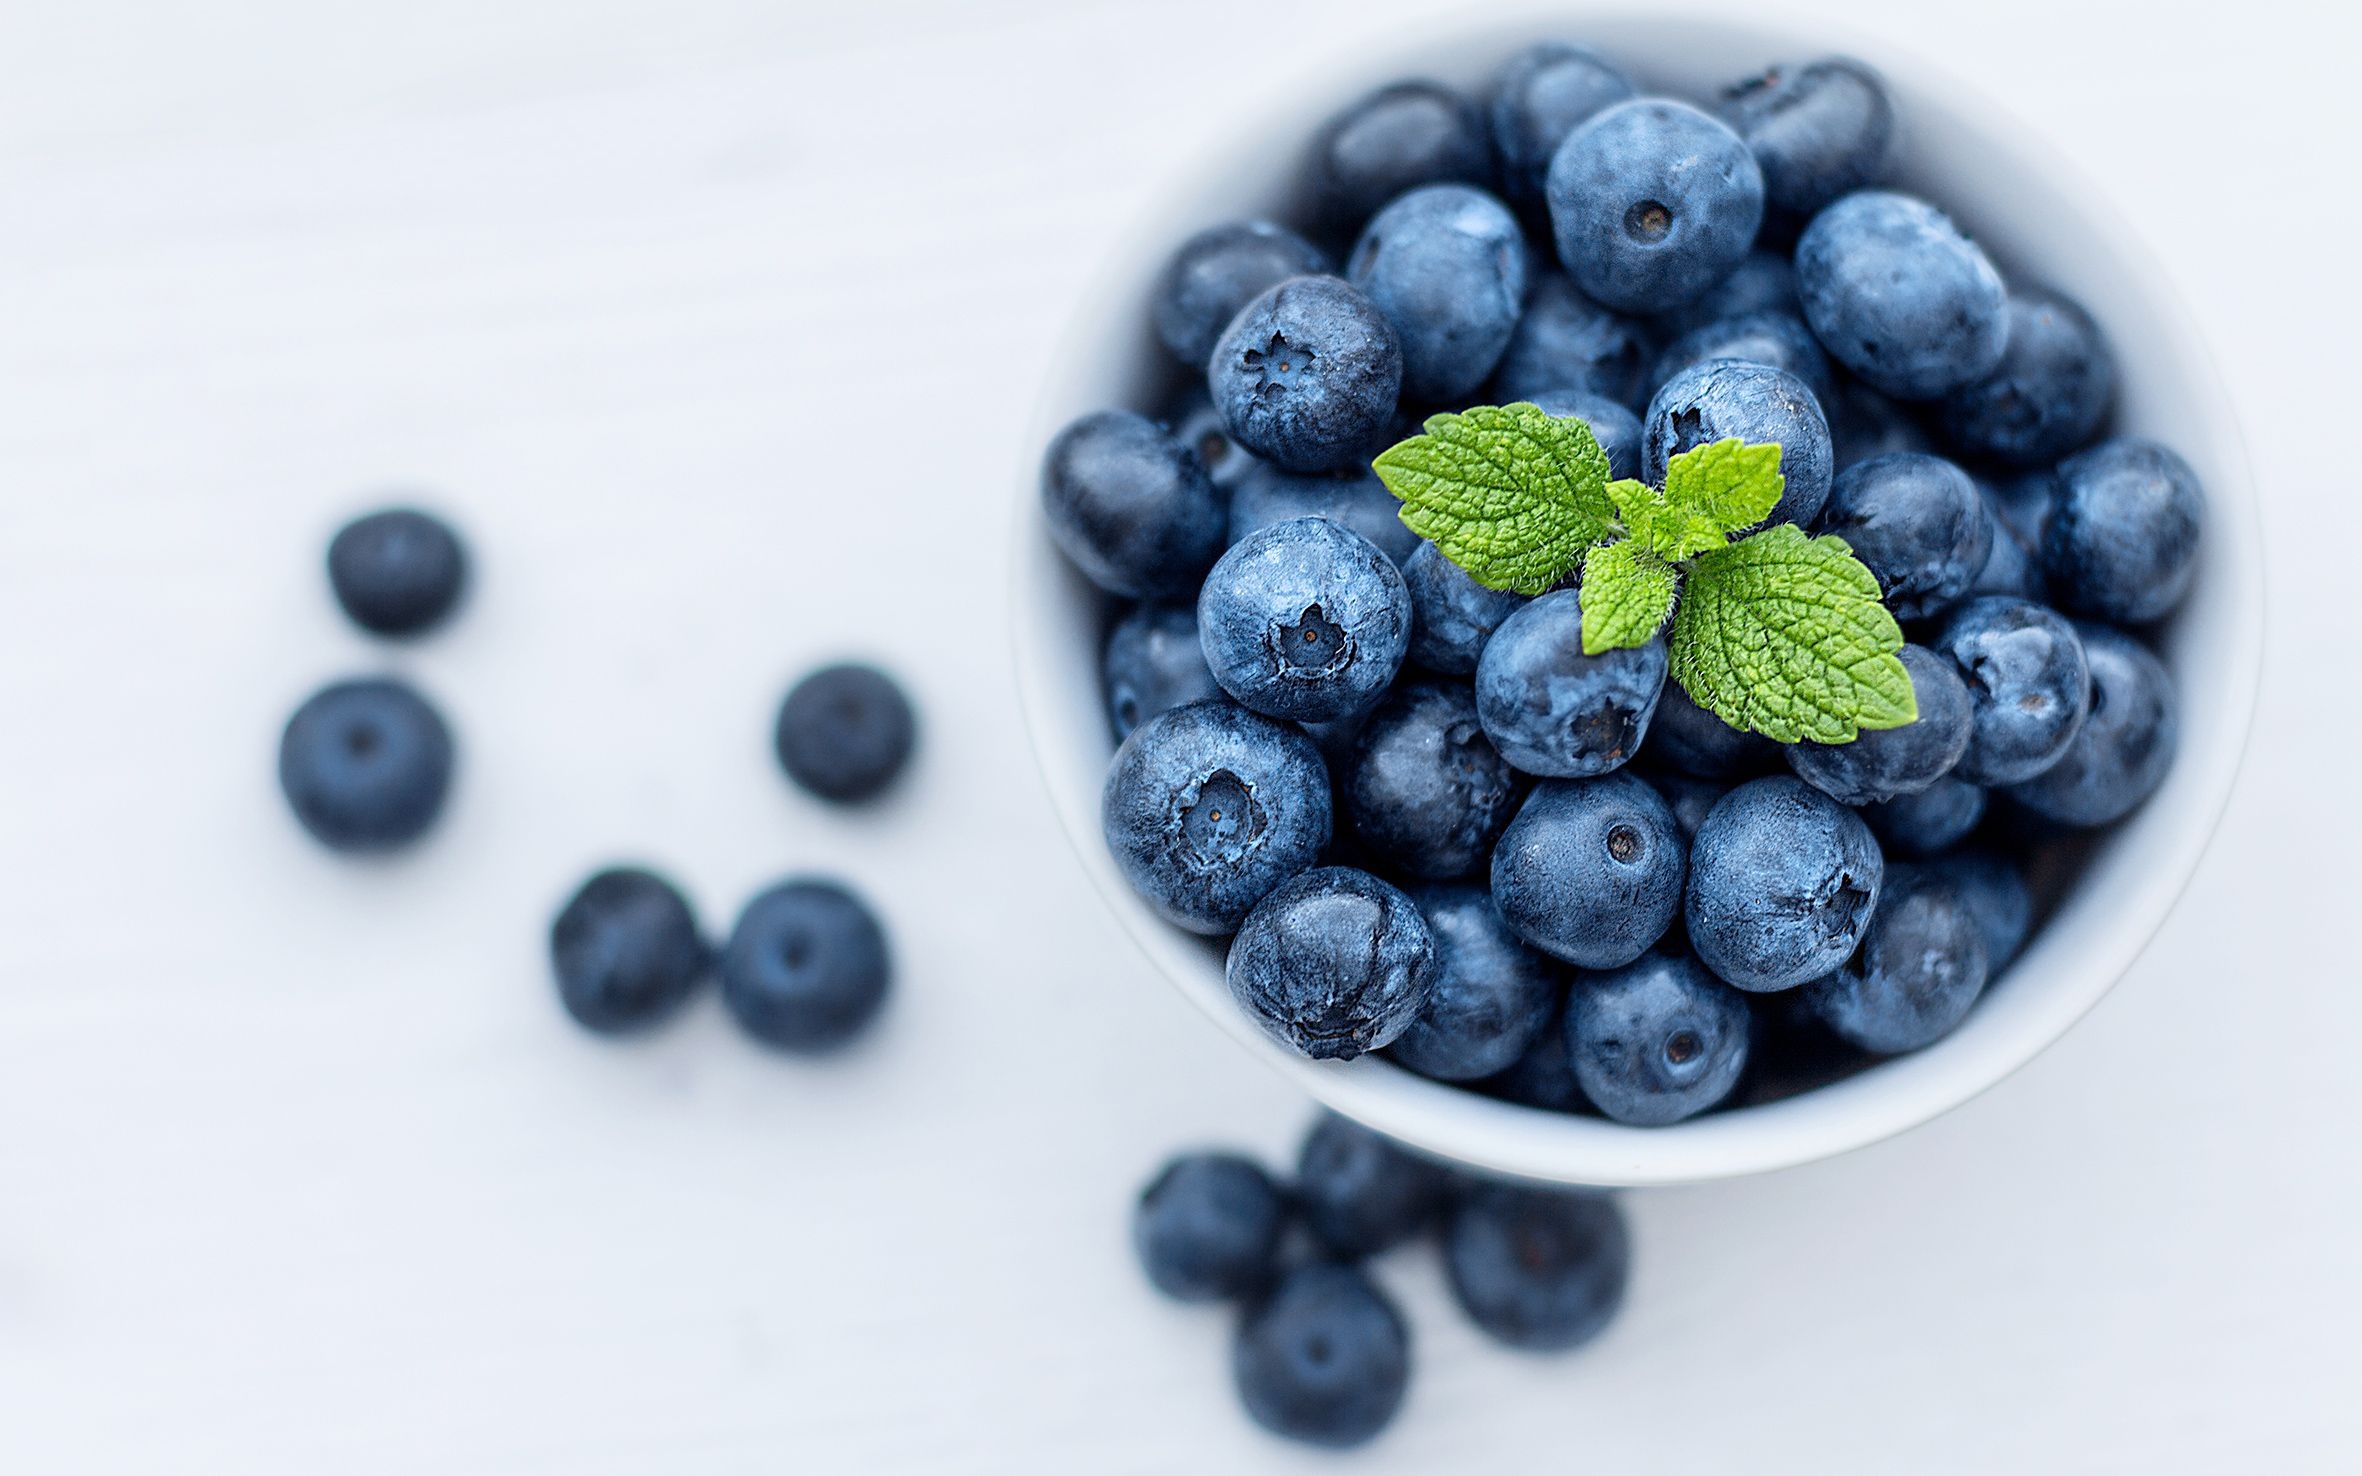 Juicy blueberries, Mouthwatering treat, Berrylicious, Nature's candy, 2370x1480 HD Desktop